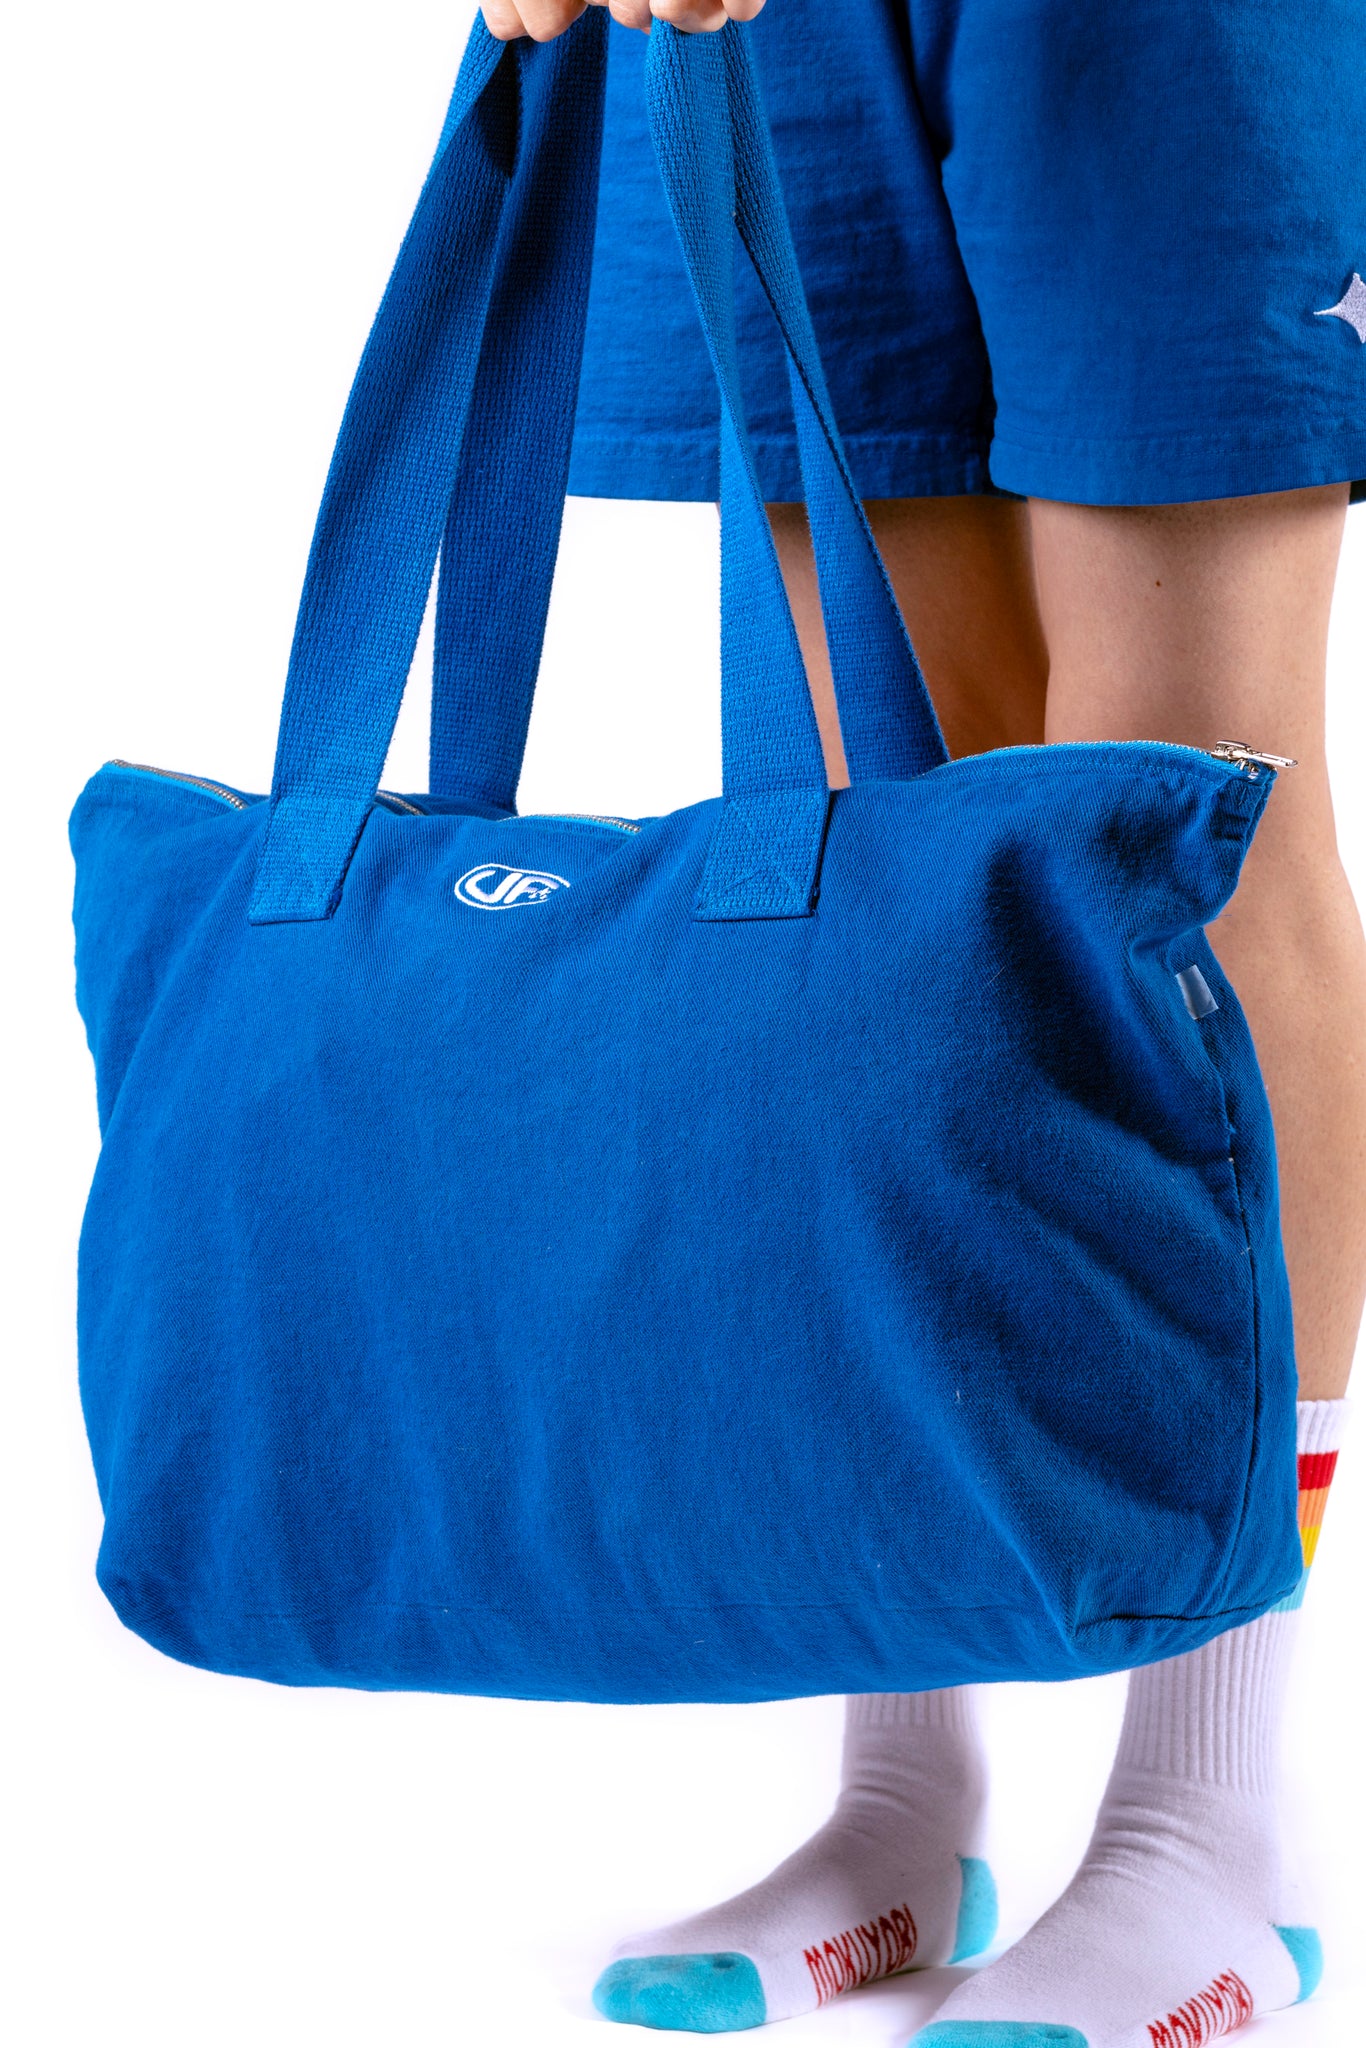 Embroidered UF tote bag